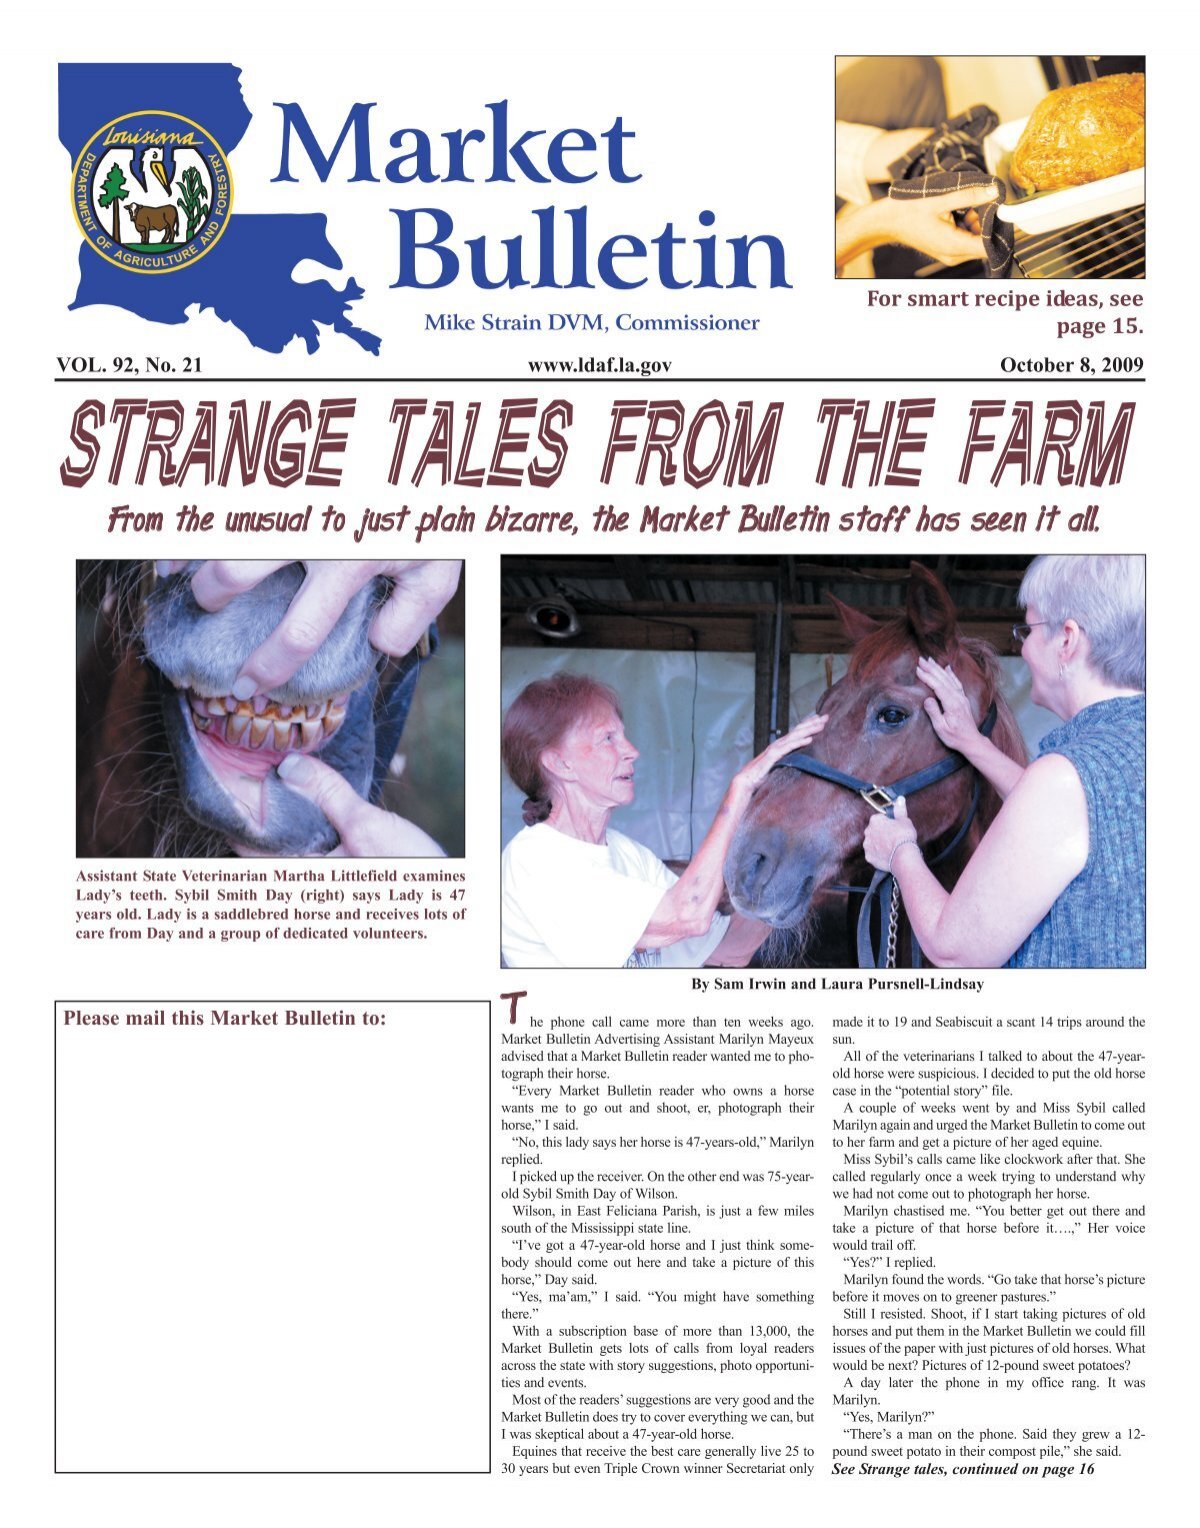 Strange tales from the farm - Department of Agriculture and Forestry